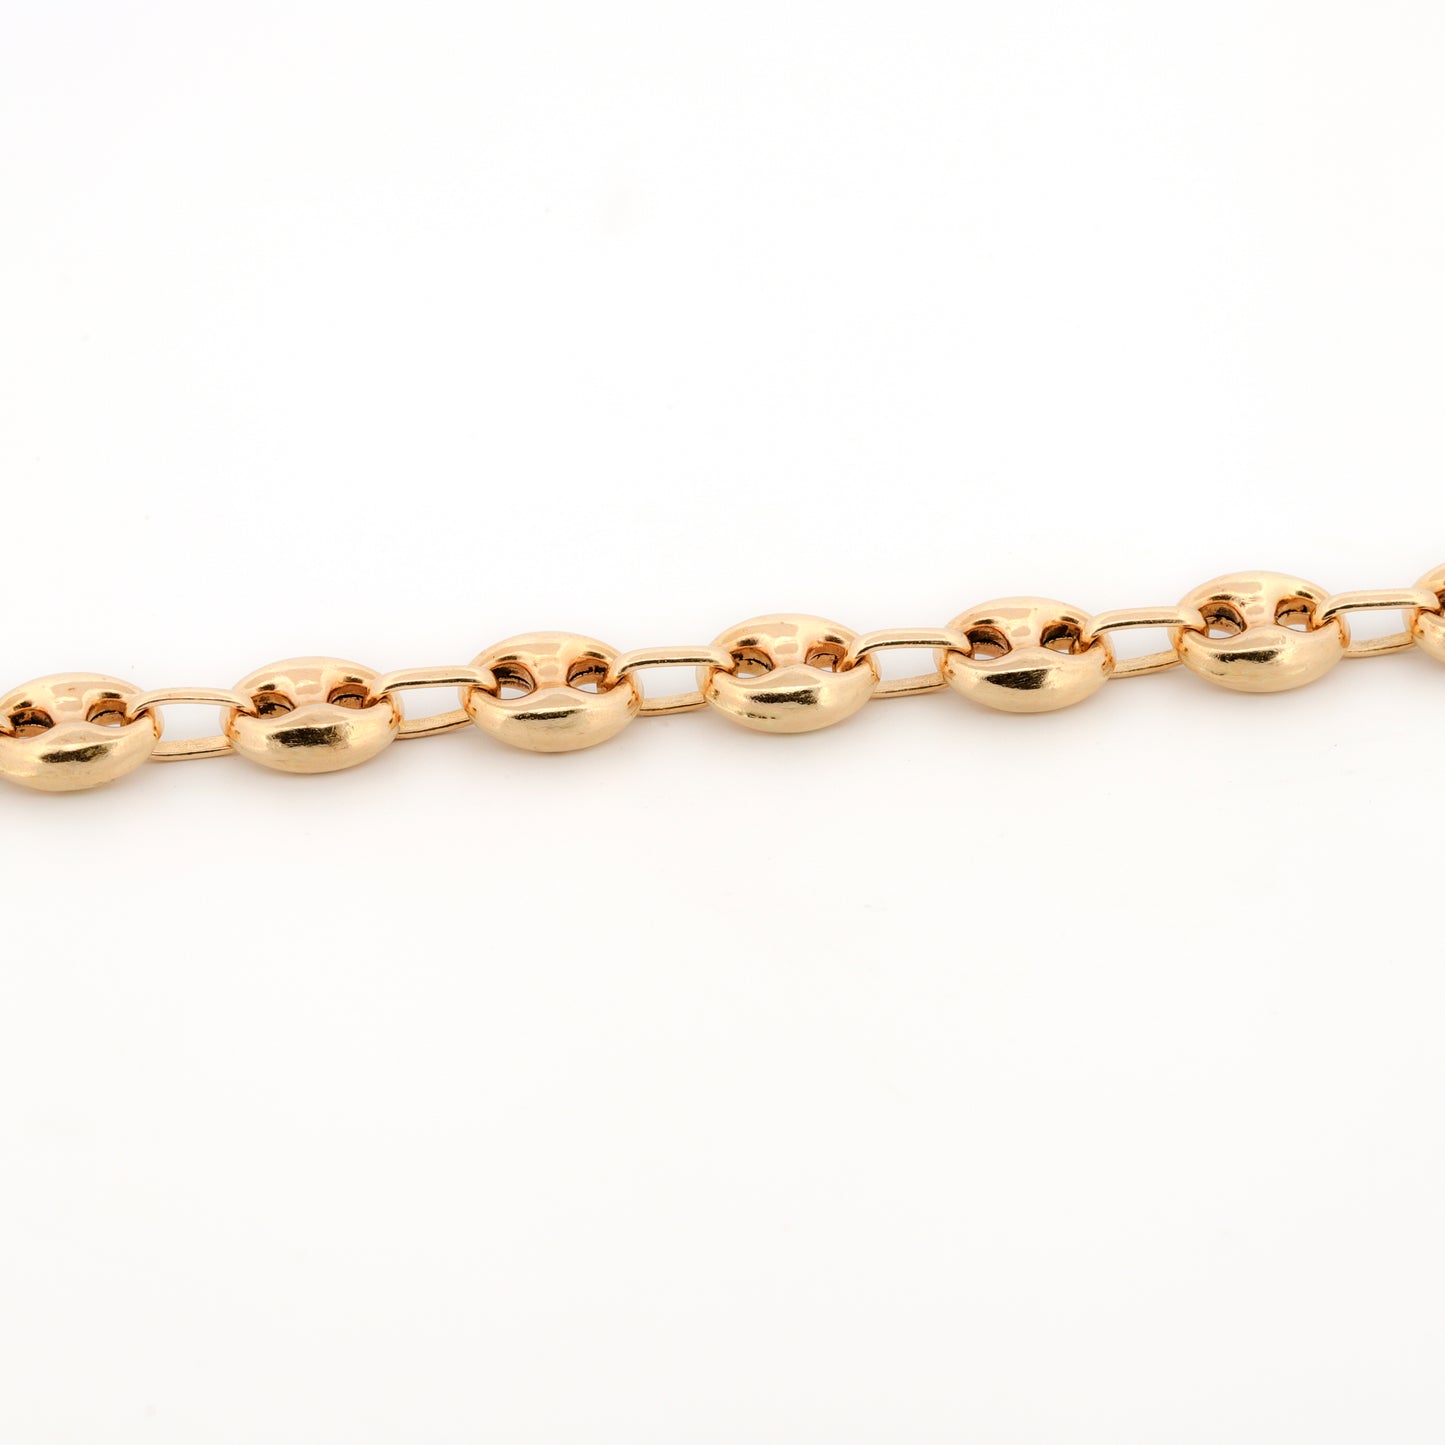 Mariier's Puff "Gucci" Link 6mm Chain Bracelet in 14k Yellow Gold